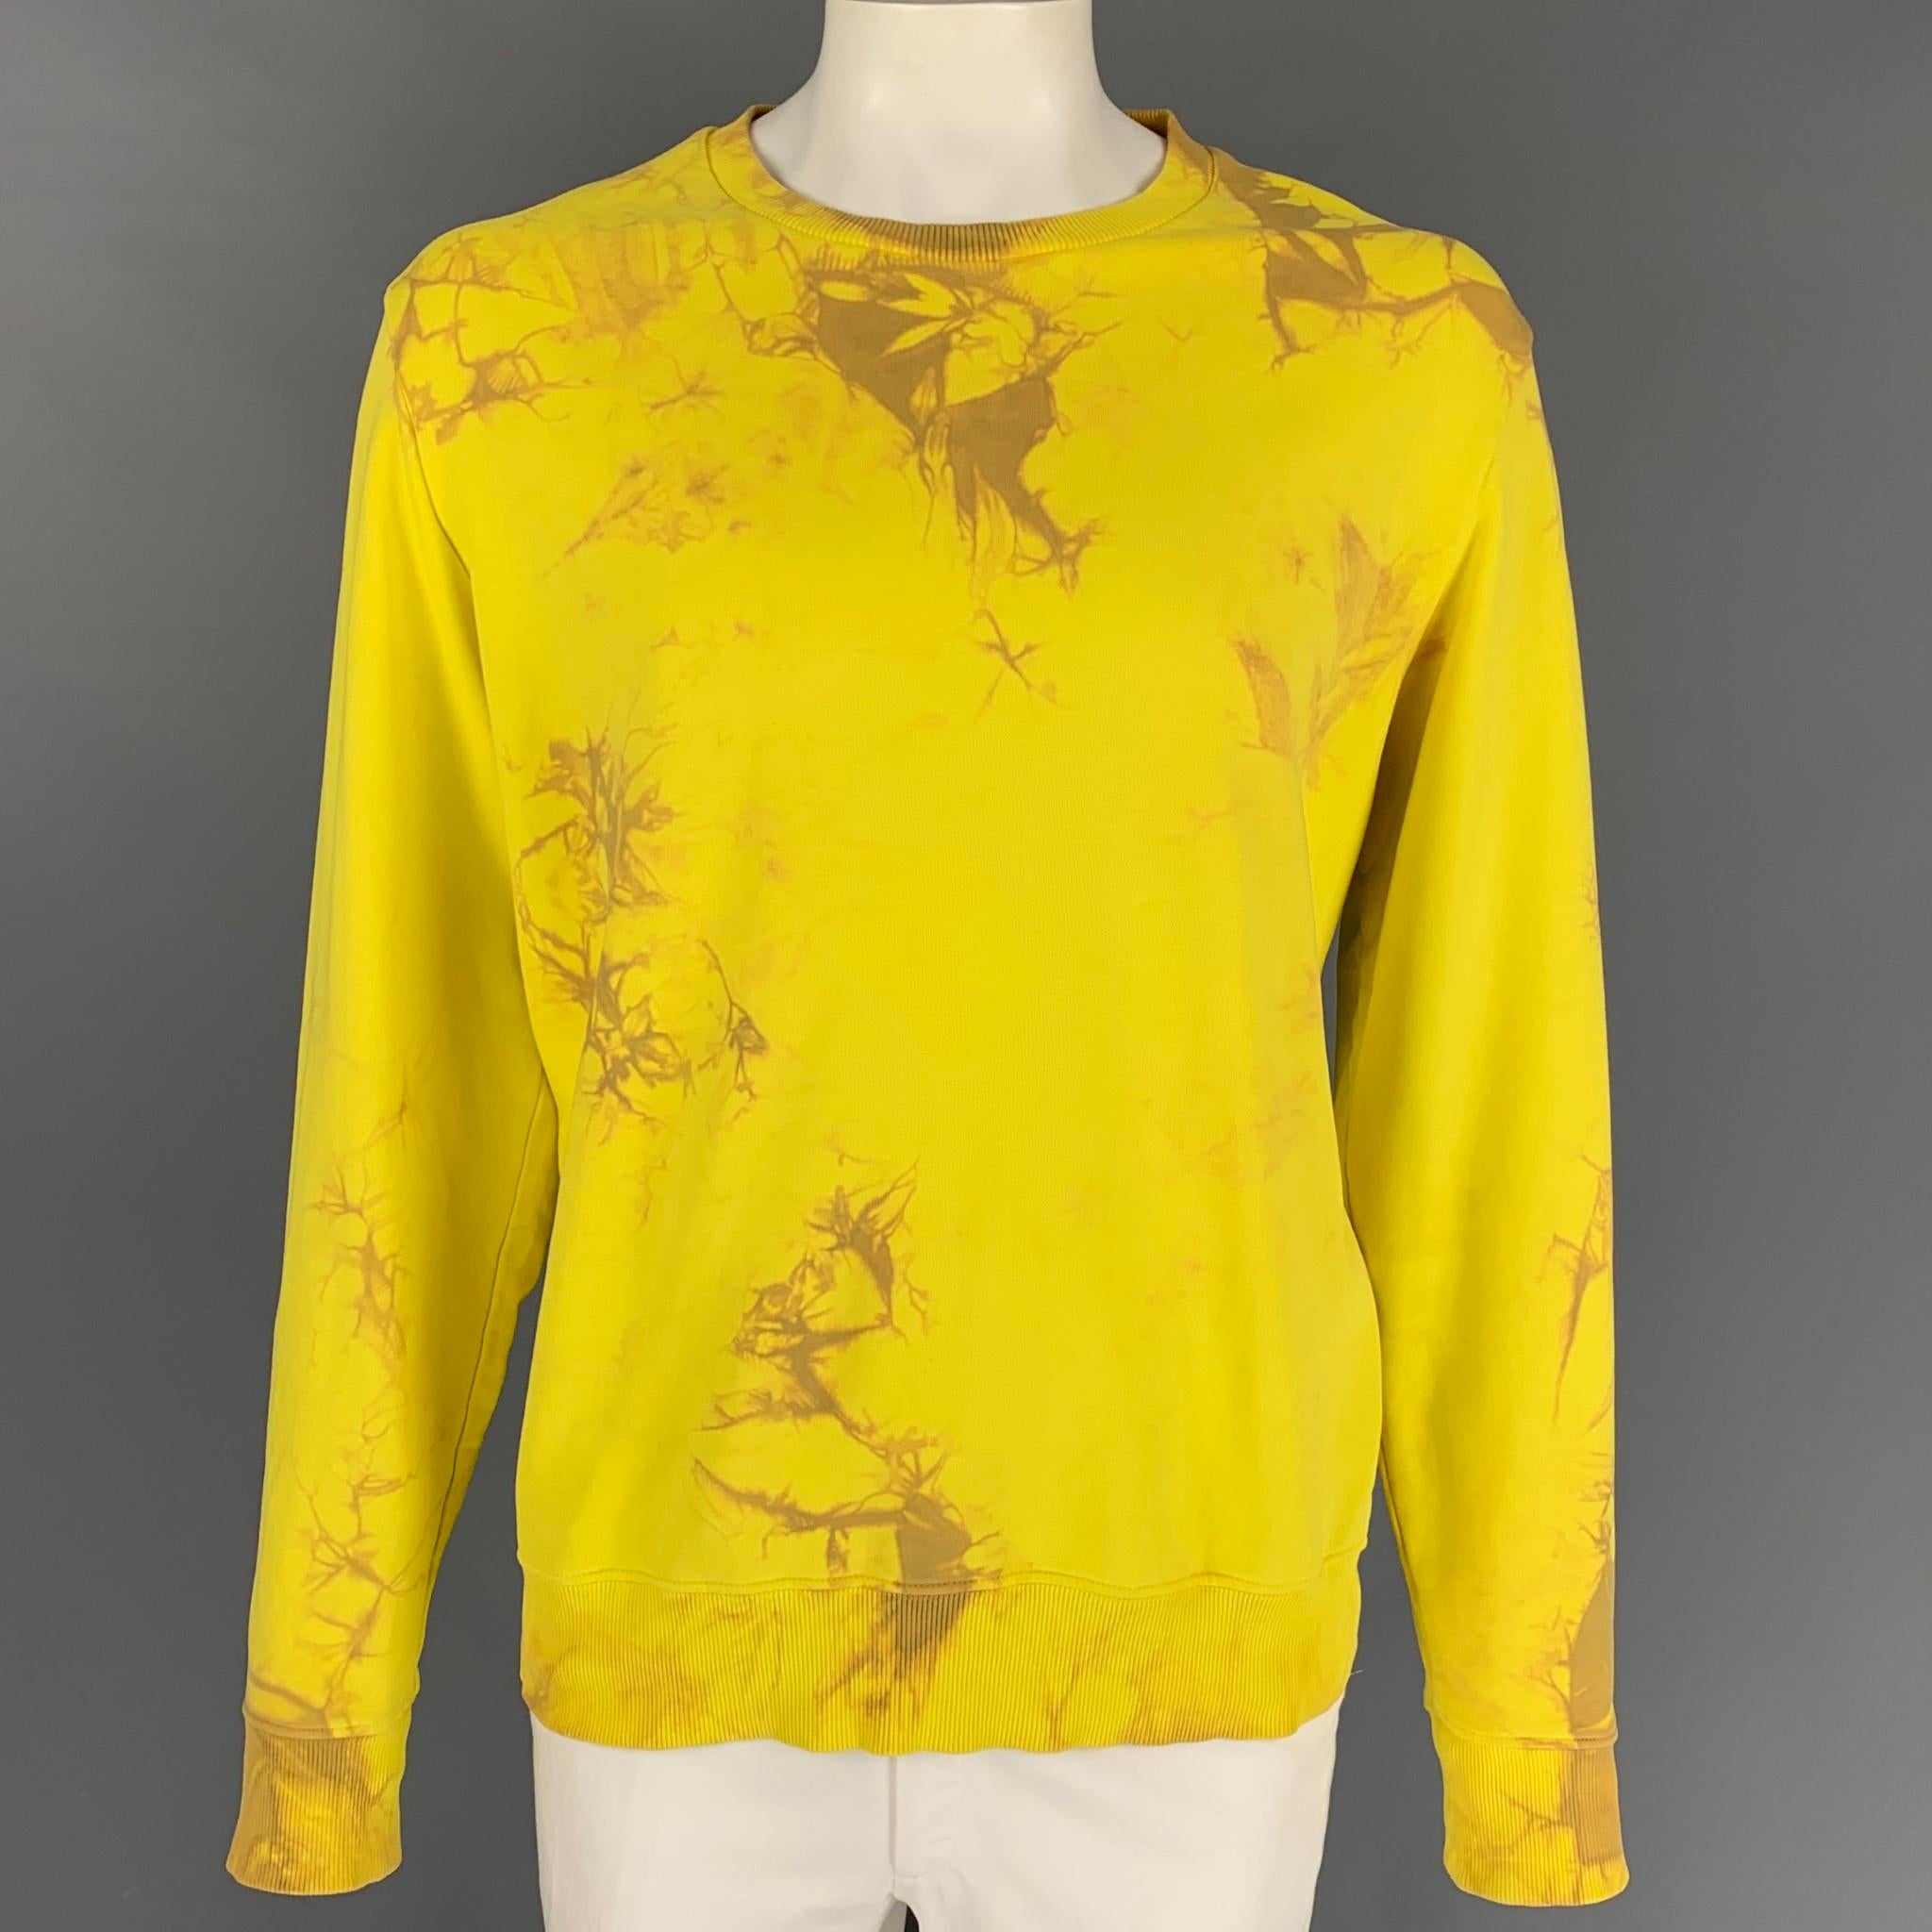 HELMUT LANG sweatshirt comes in a yellow & brown tie dye cotton featuring a back logo design, ribbed hem, and a crew-neck. Made in Portugal. 

Very Good Pre-Owned Condition.
Marked: XXL

Measurements:

Shoulder: 20 in.
Chest: 50 in.
Sleeve: 29